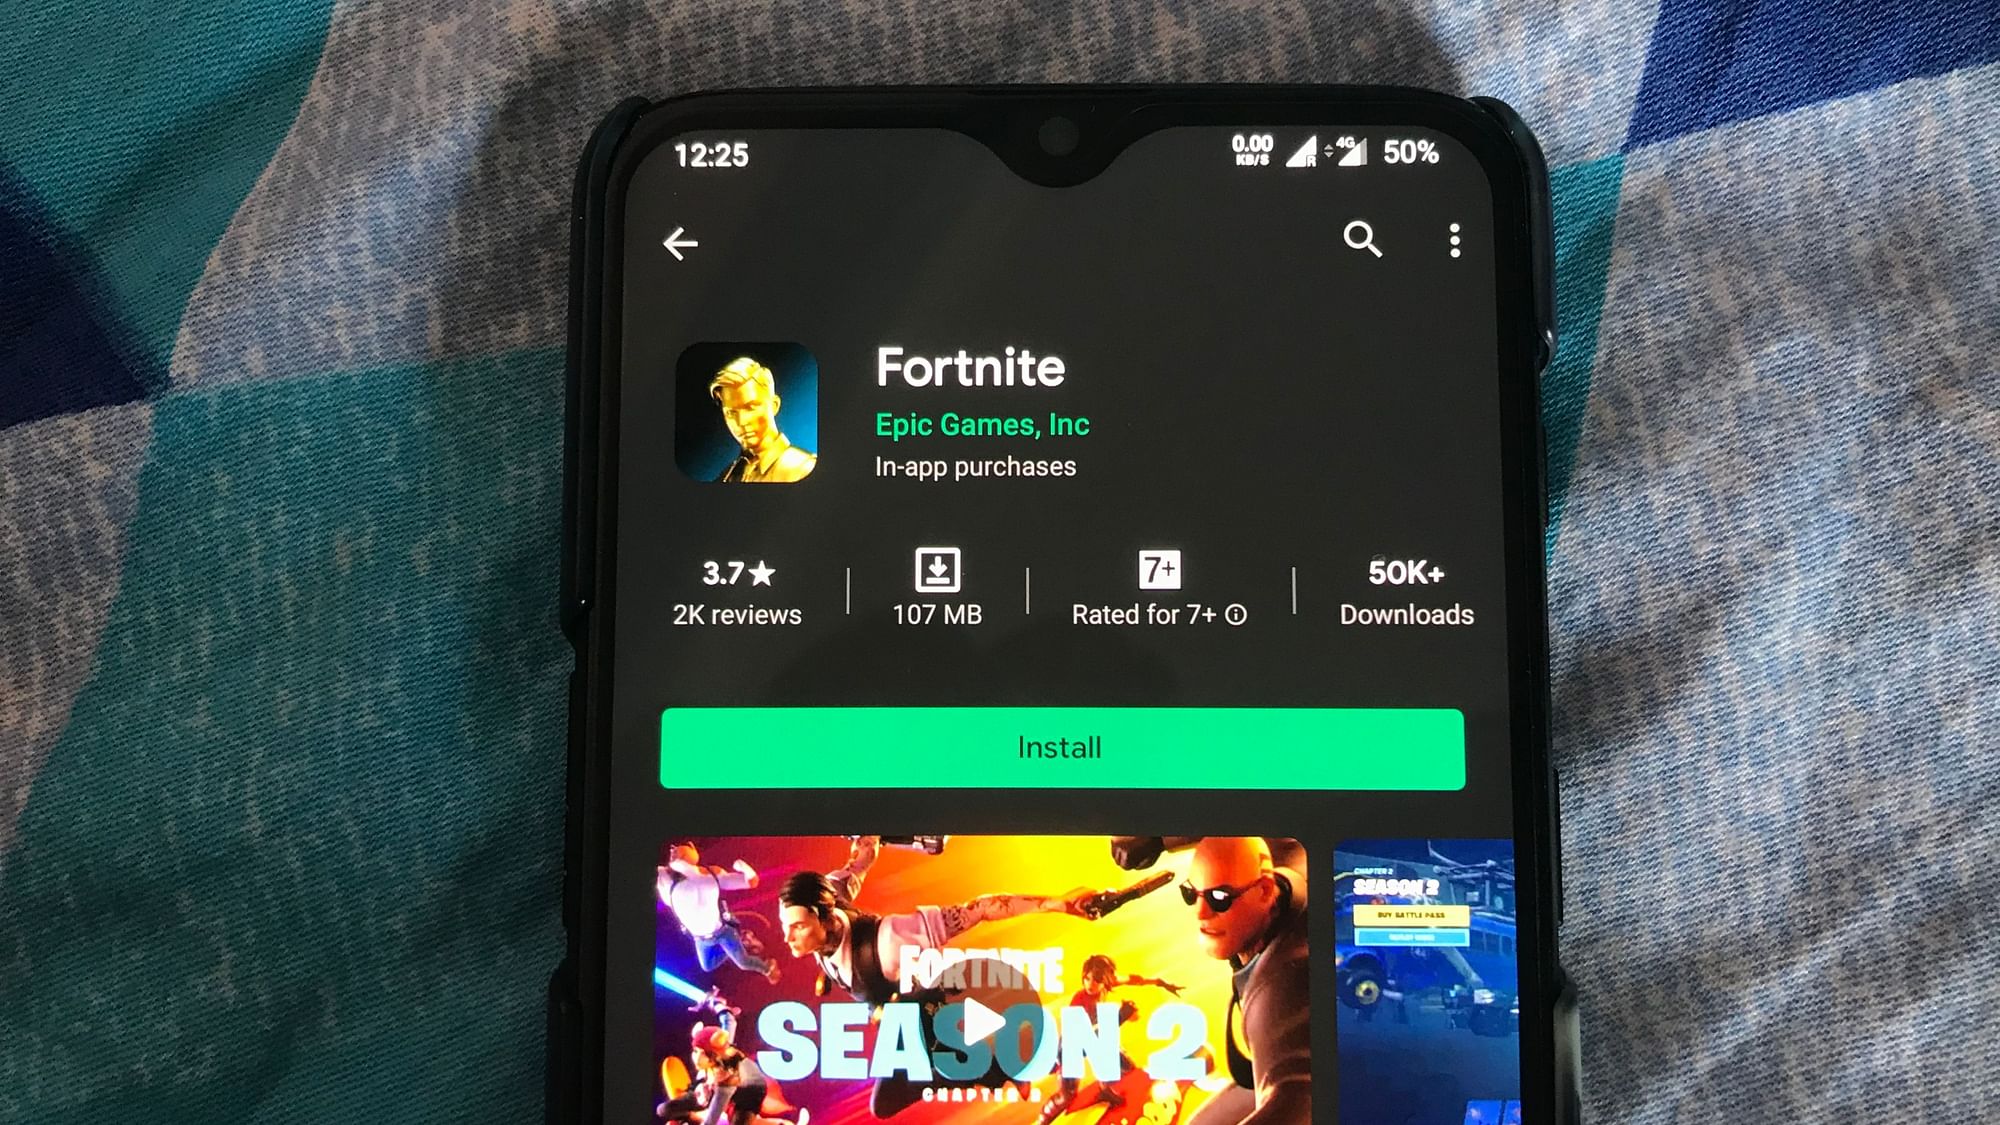 Fortnite can now be downloaded from Google Play Store.